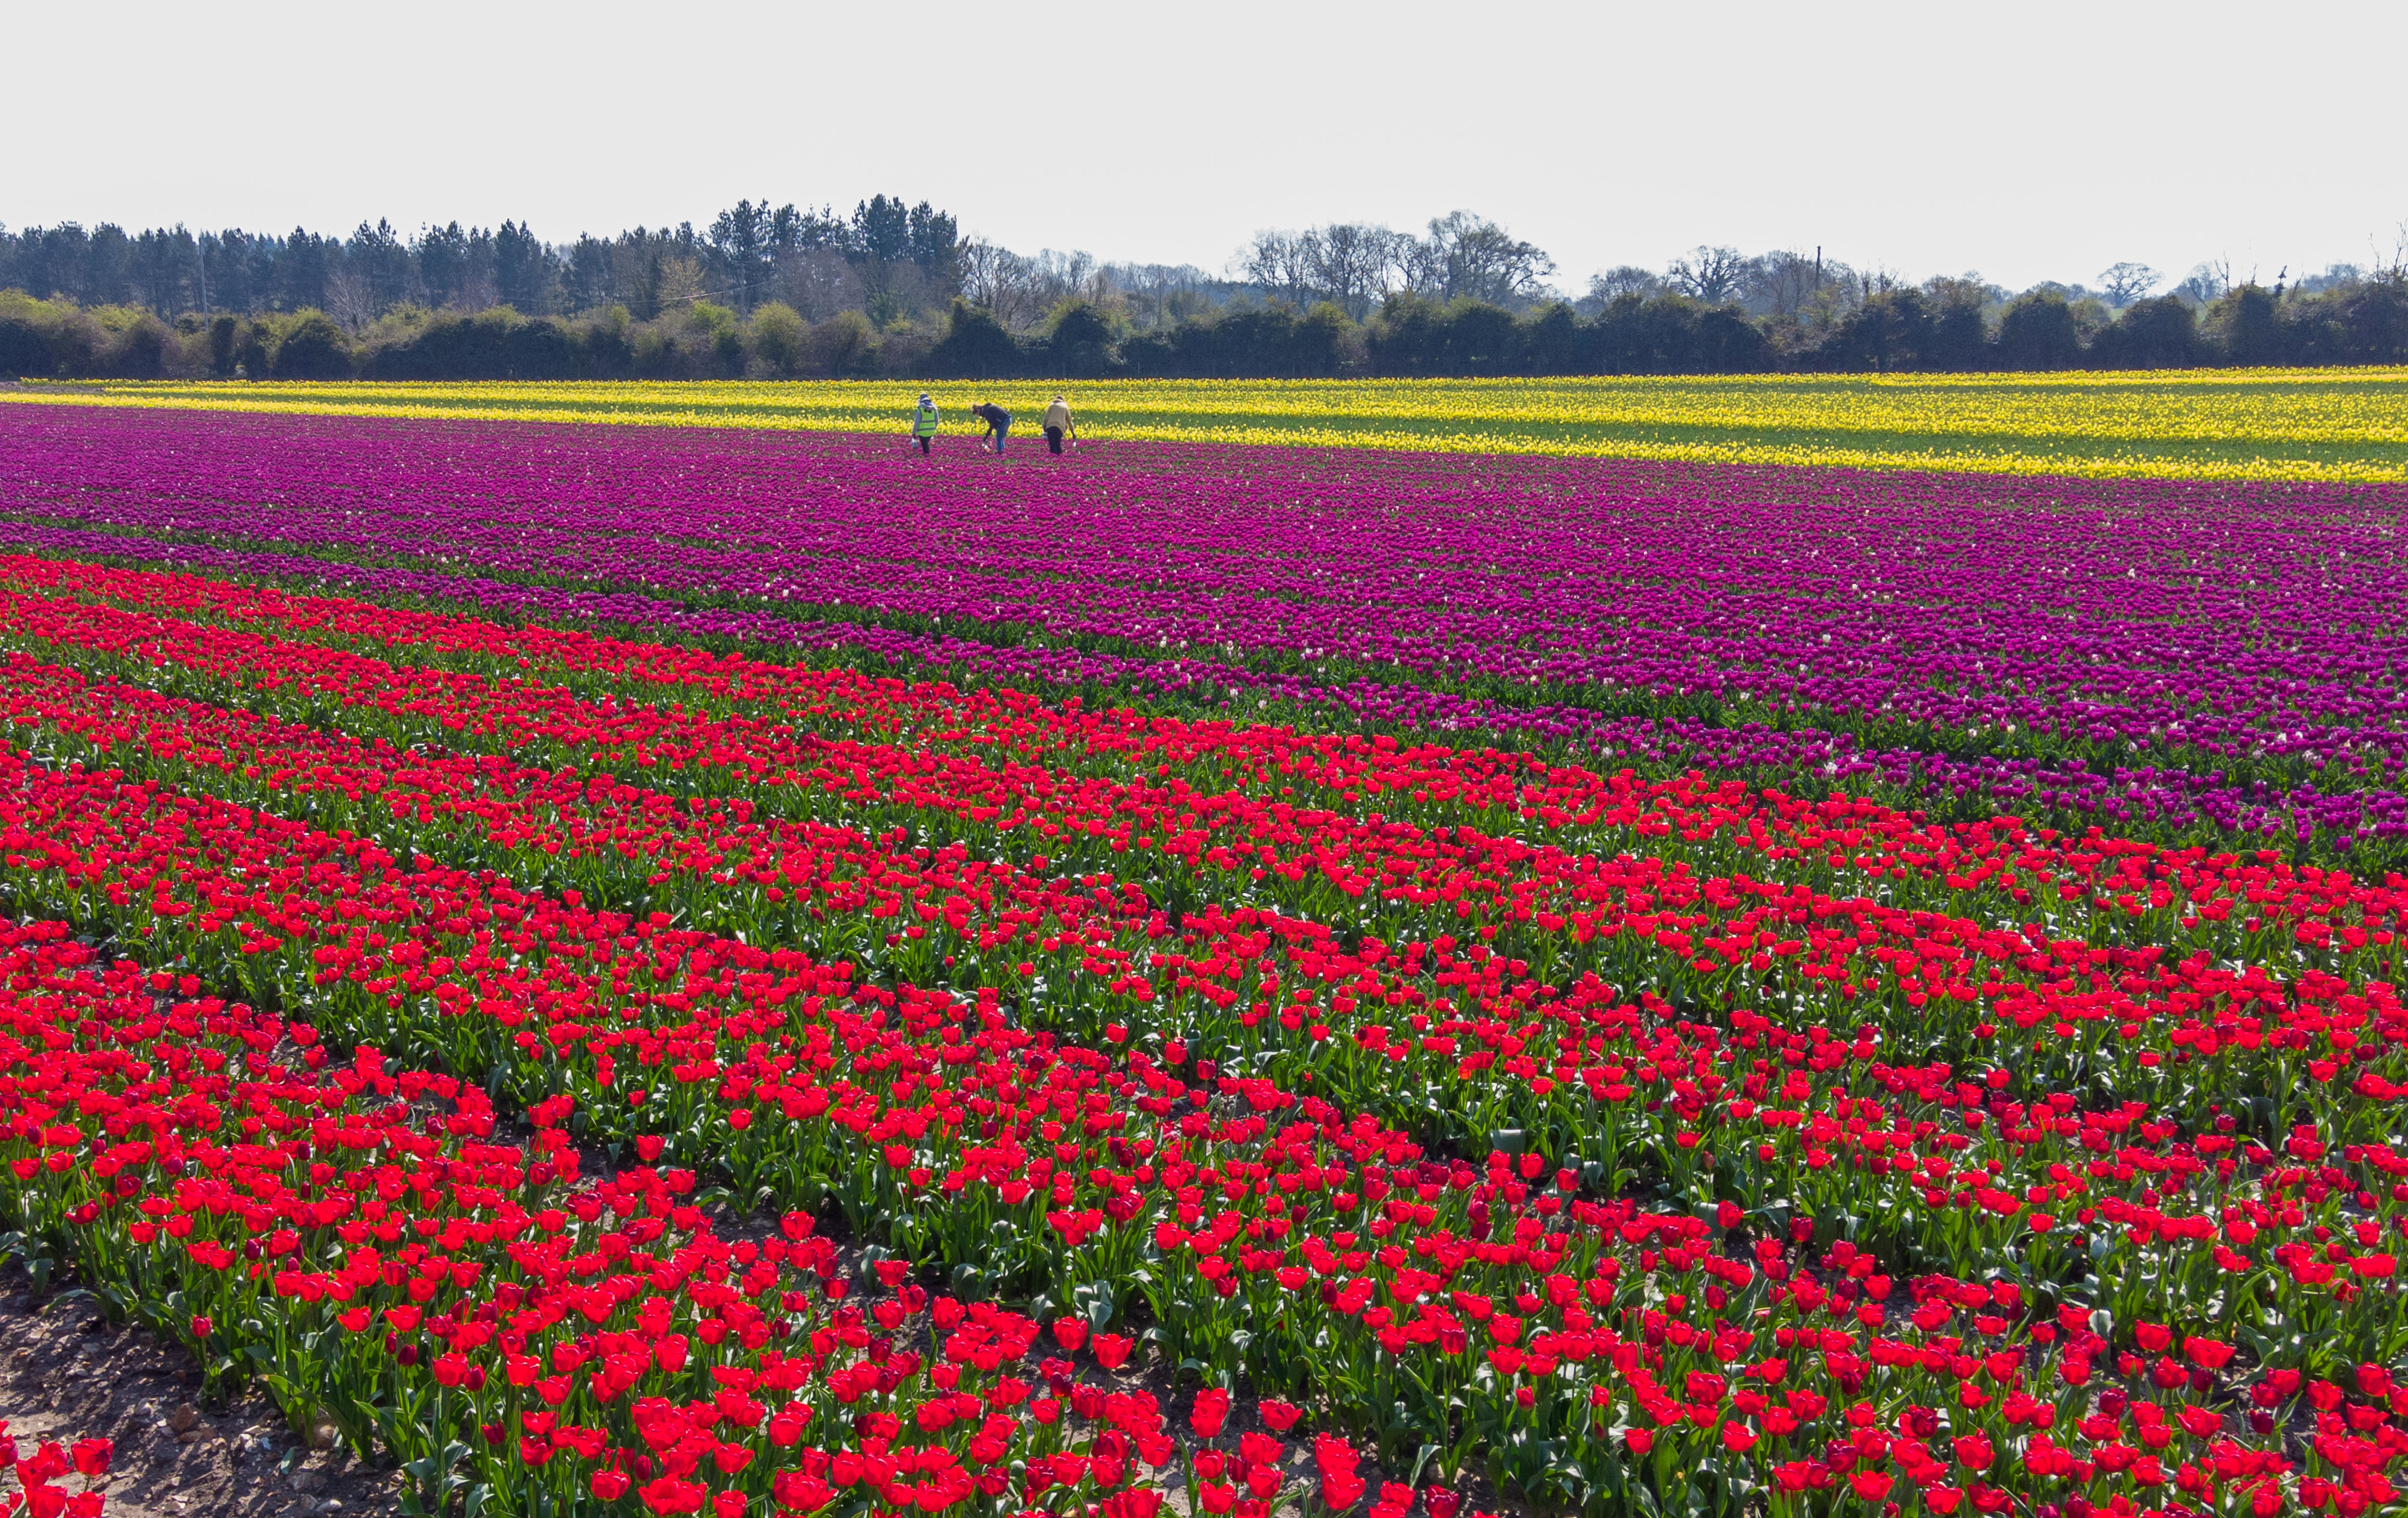 Workers make their way along rows of tulips which have burst into colour in fields near King's Lynn in Norfolk. (Joe Giddens/ PA)